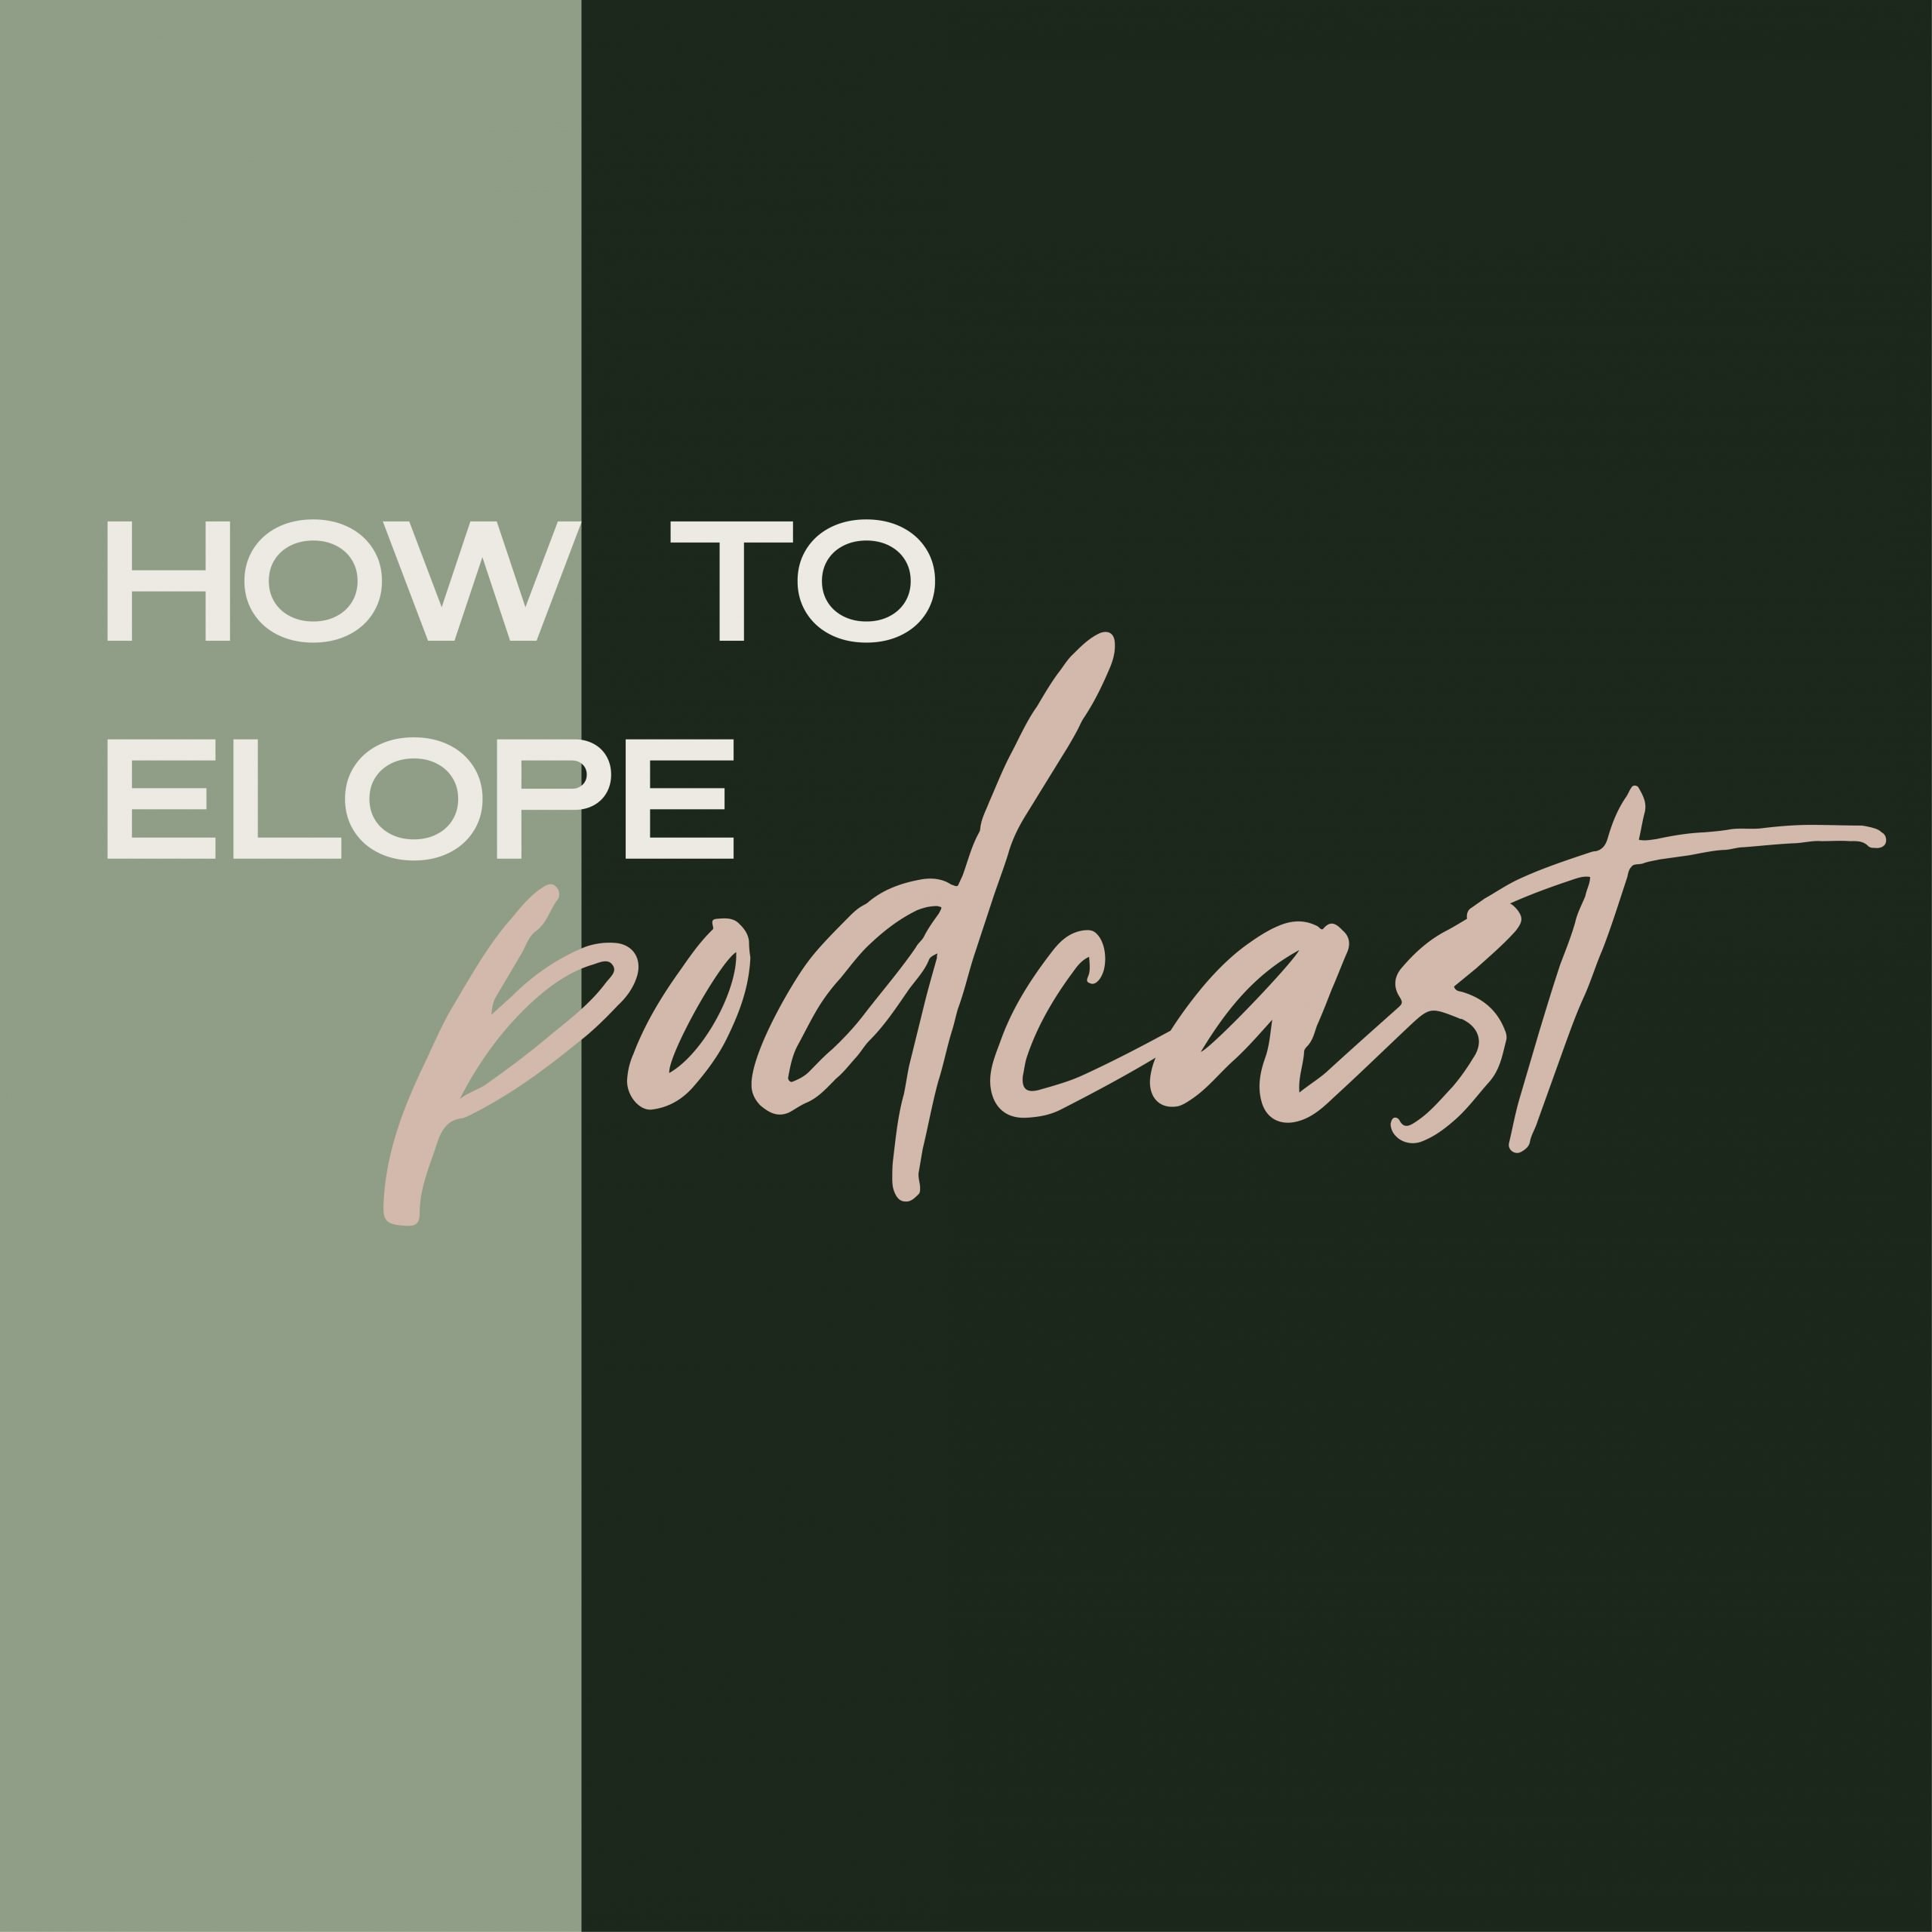 how to elope podcast logo